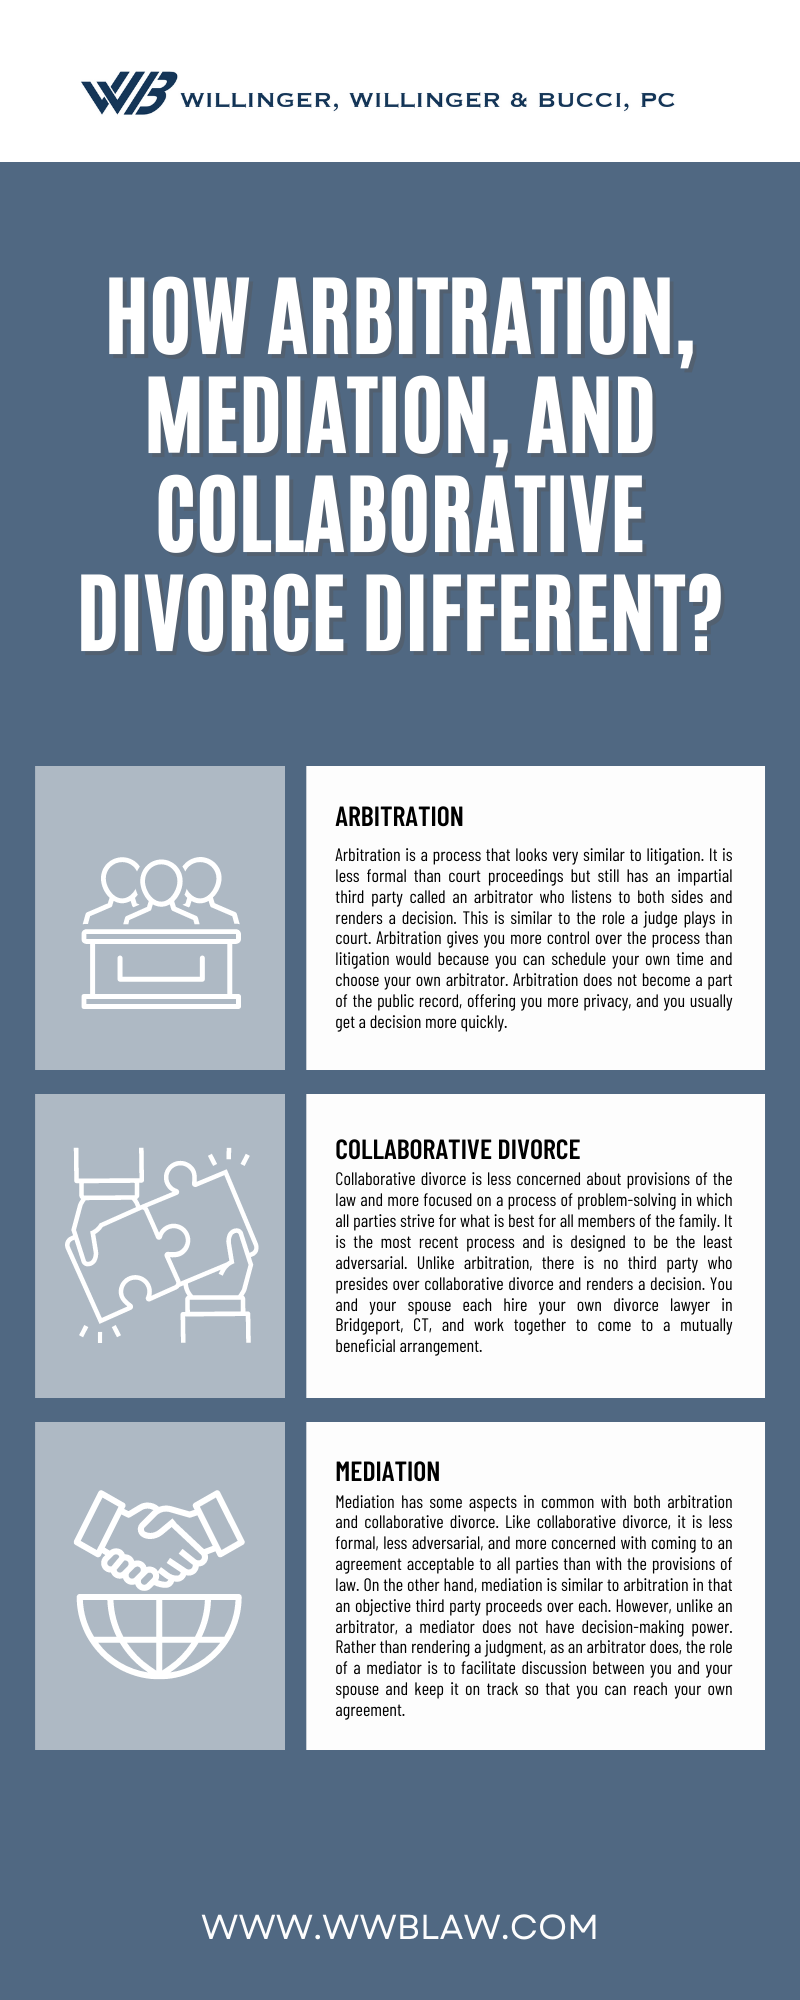 How Are Arbitration, Mediation, and Collaborative Divorce Different? Infographic